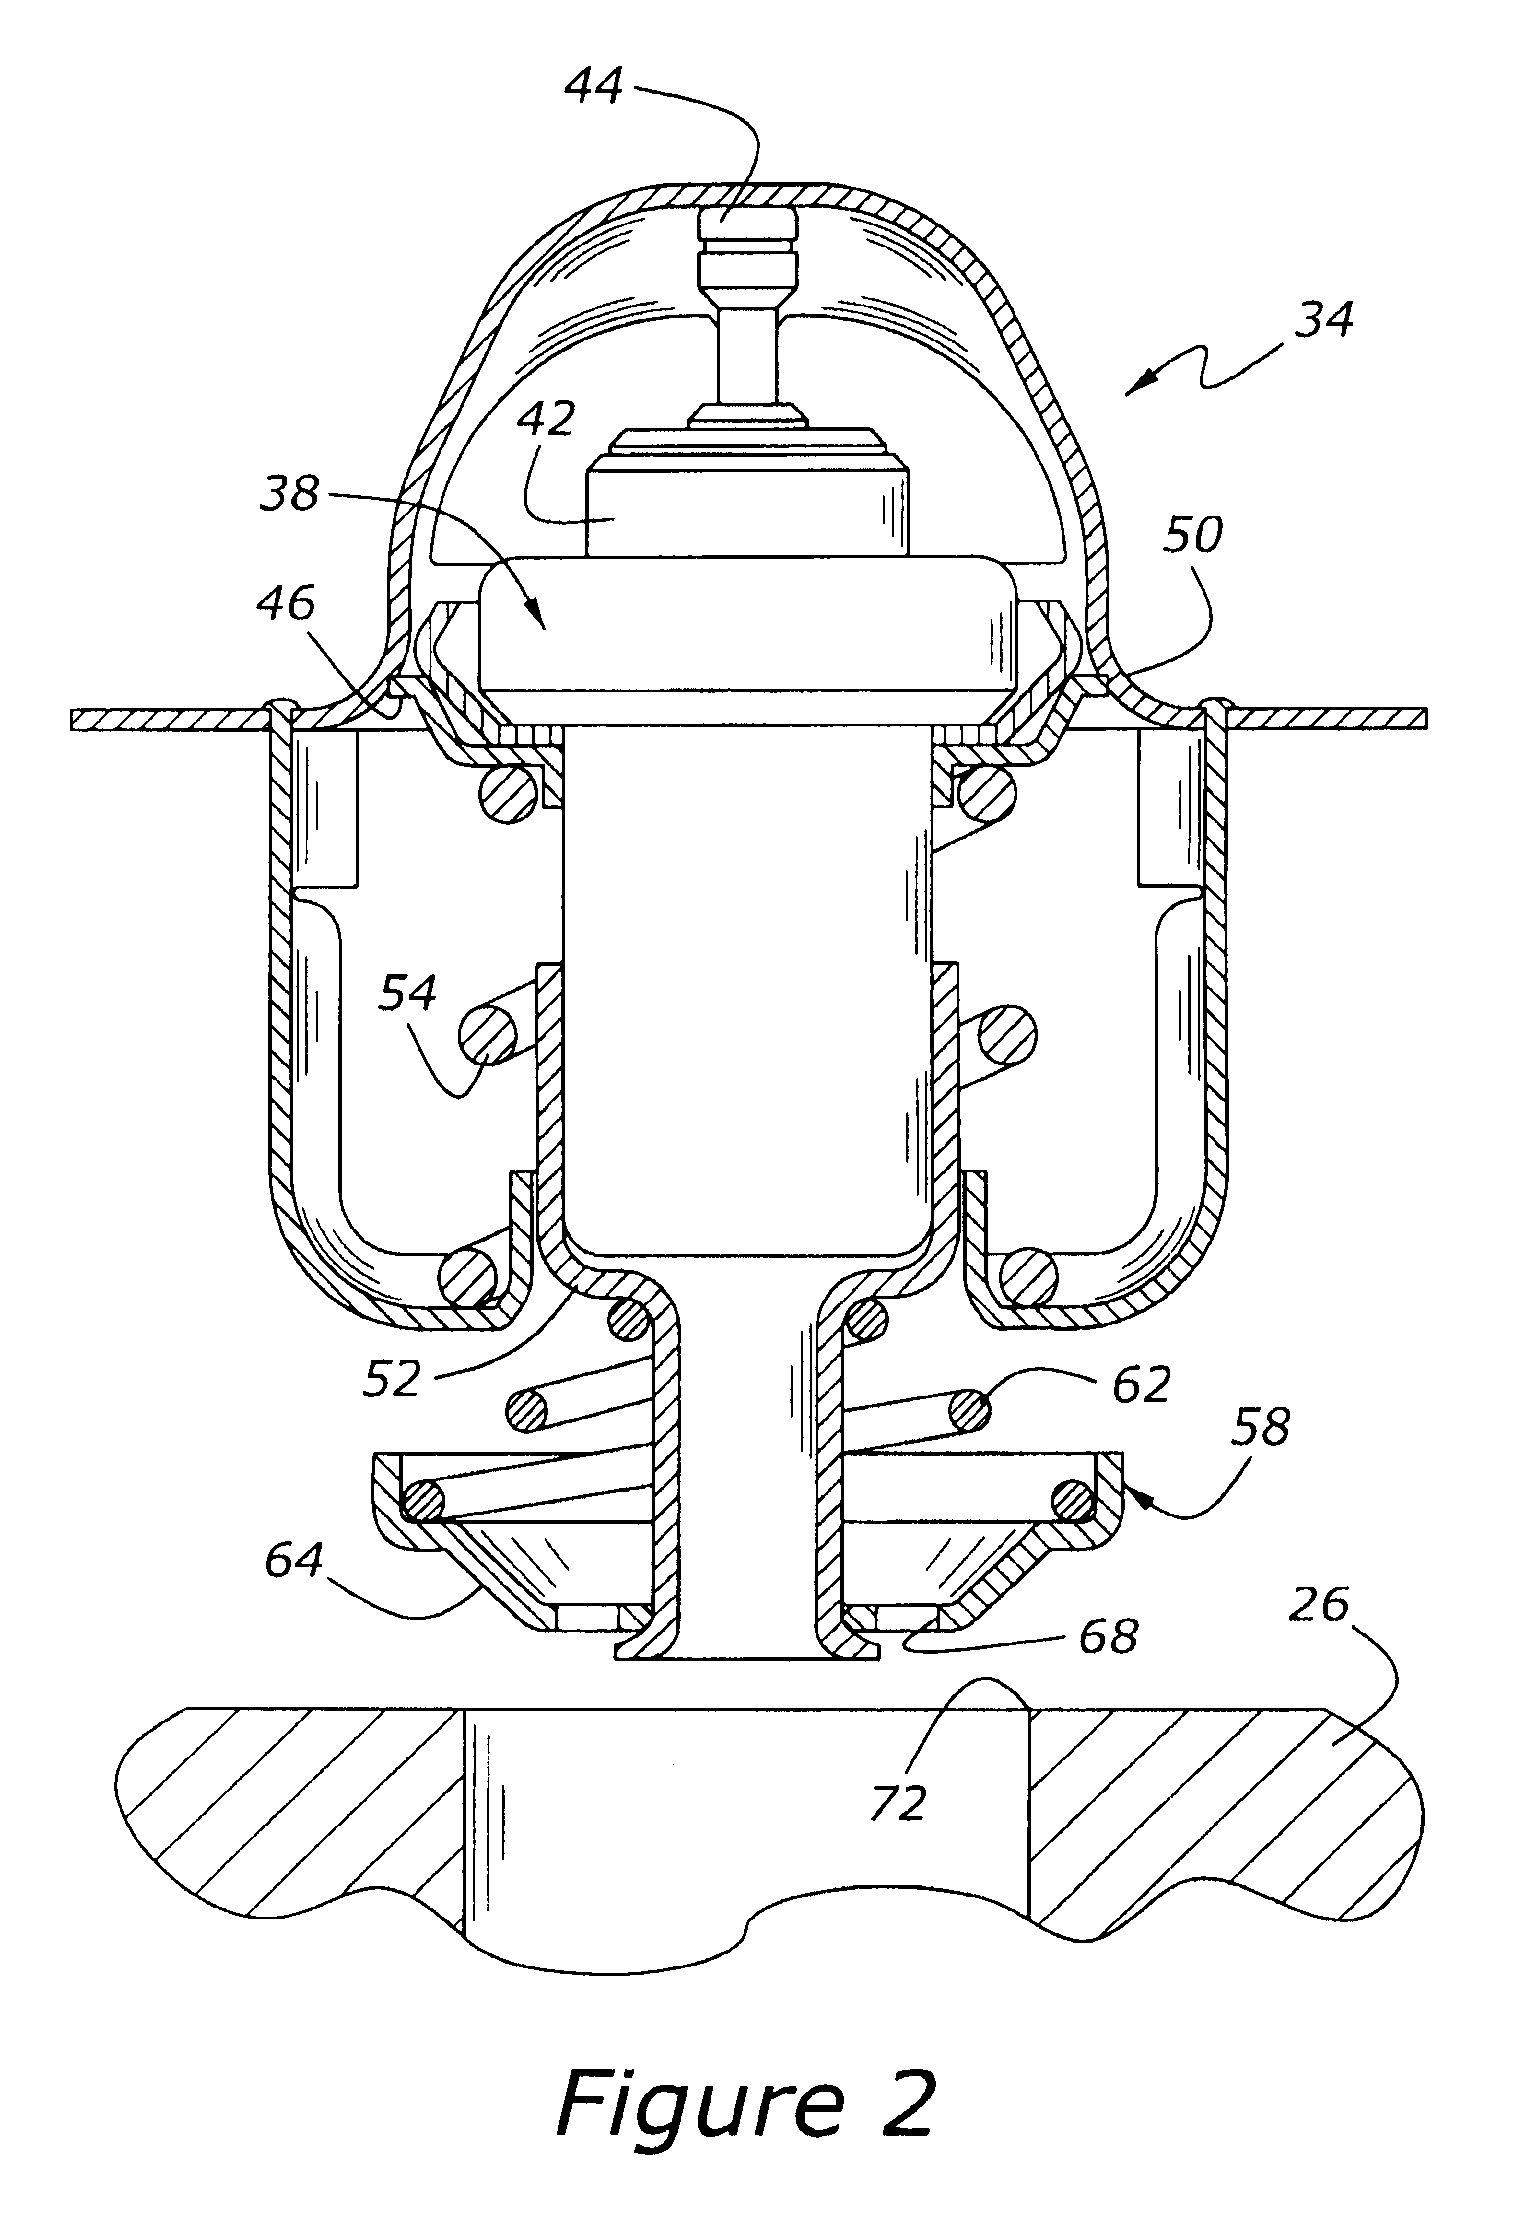 Liquid cooling system for internal combustion engine